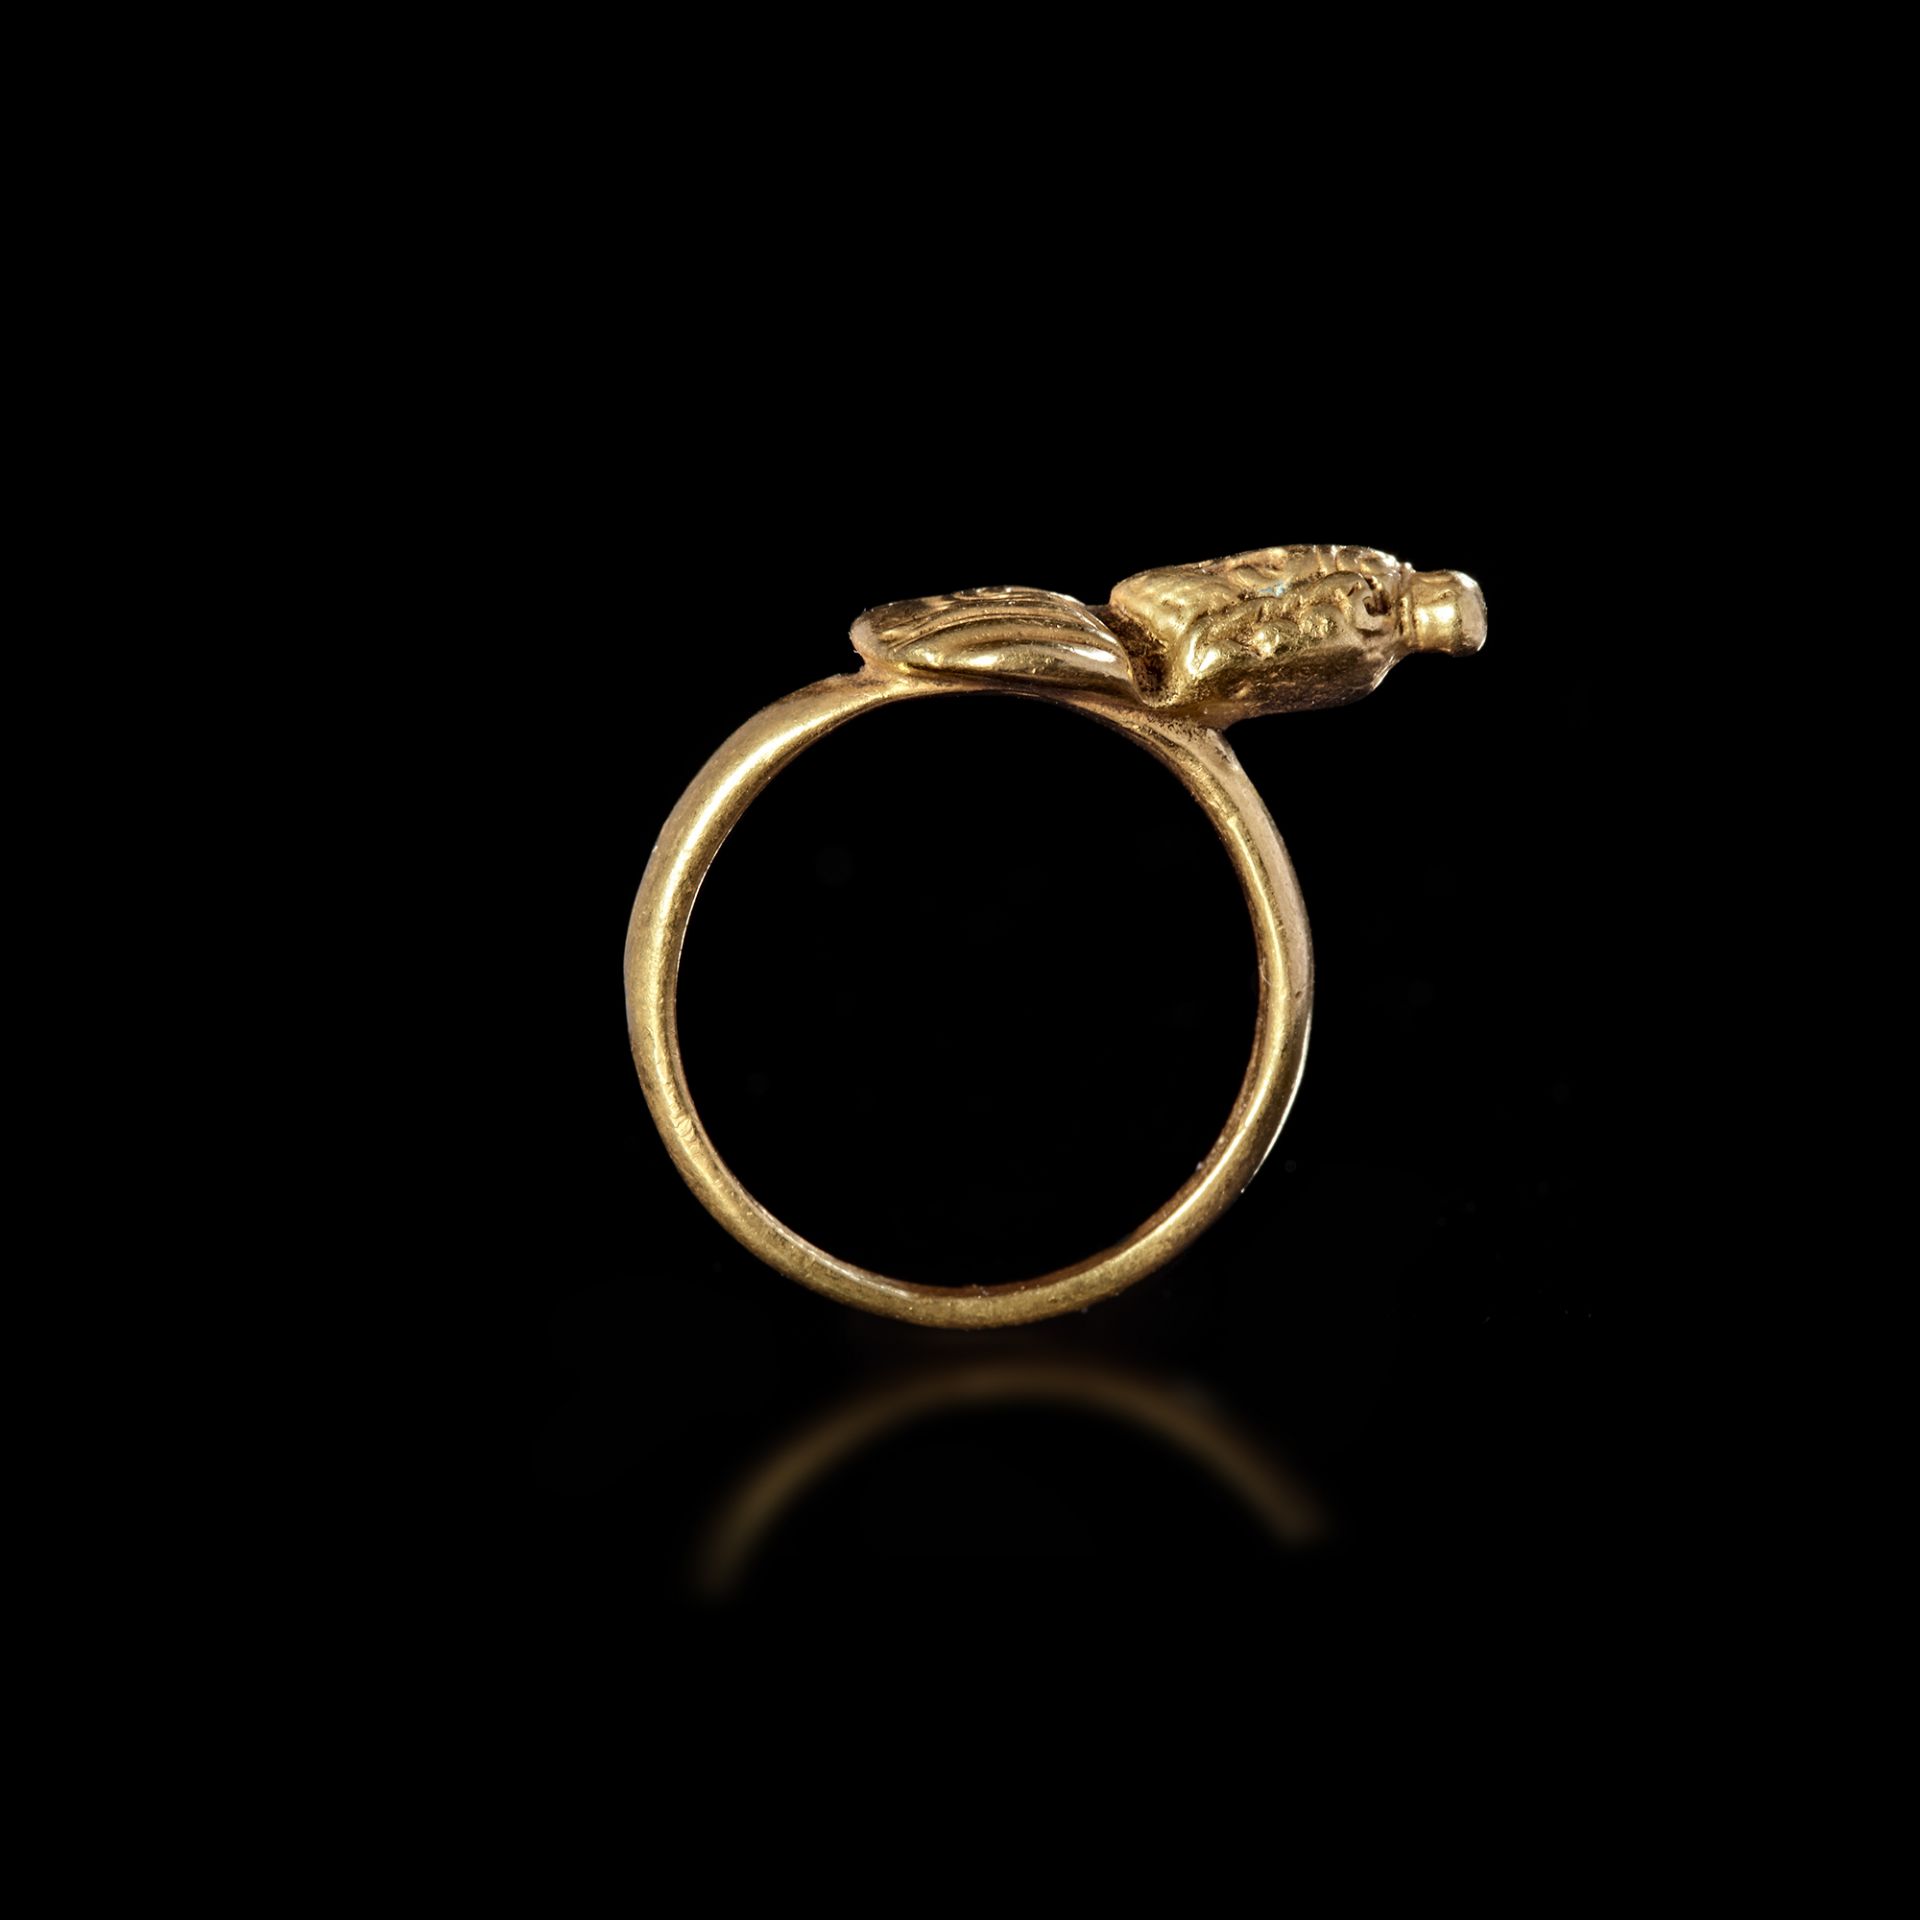 A ROMAN GOLD RING WITH A BUST OF SERAPIS, 1ST CENTURY AD - Image 2 of 3